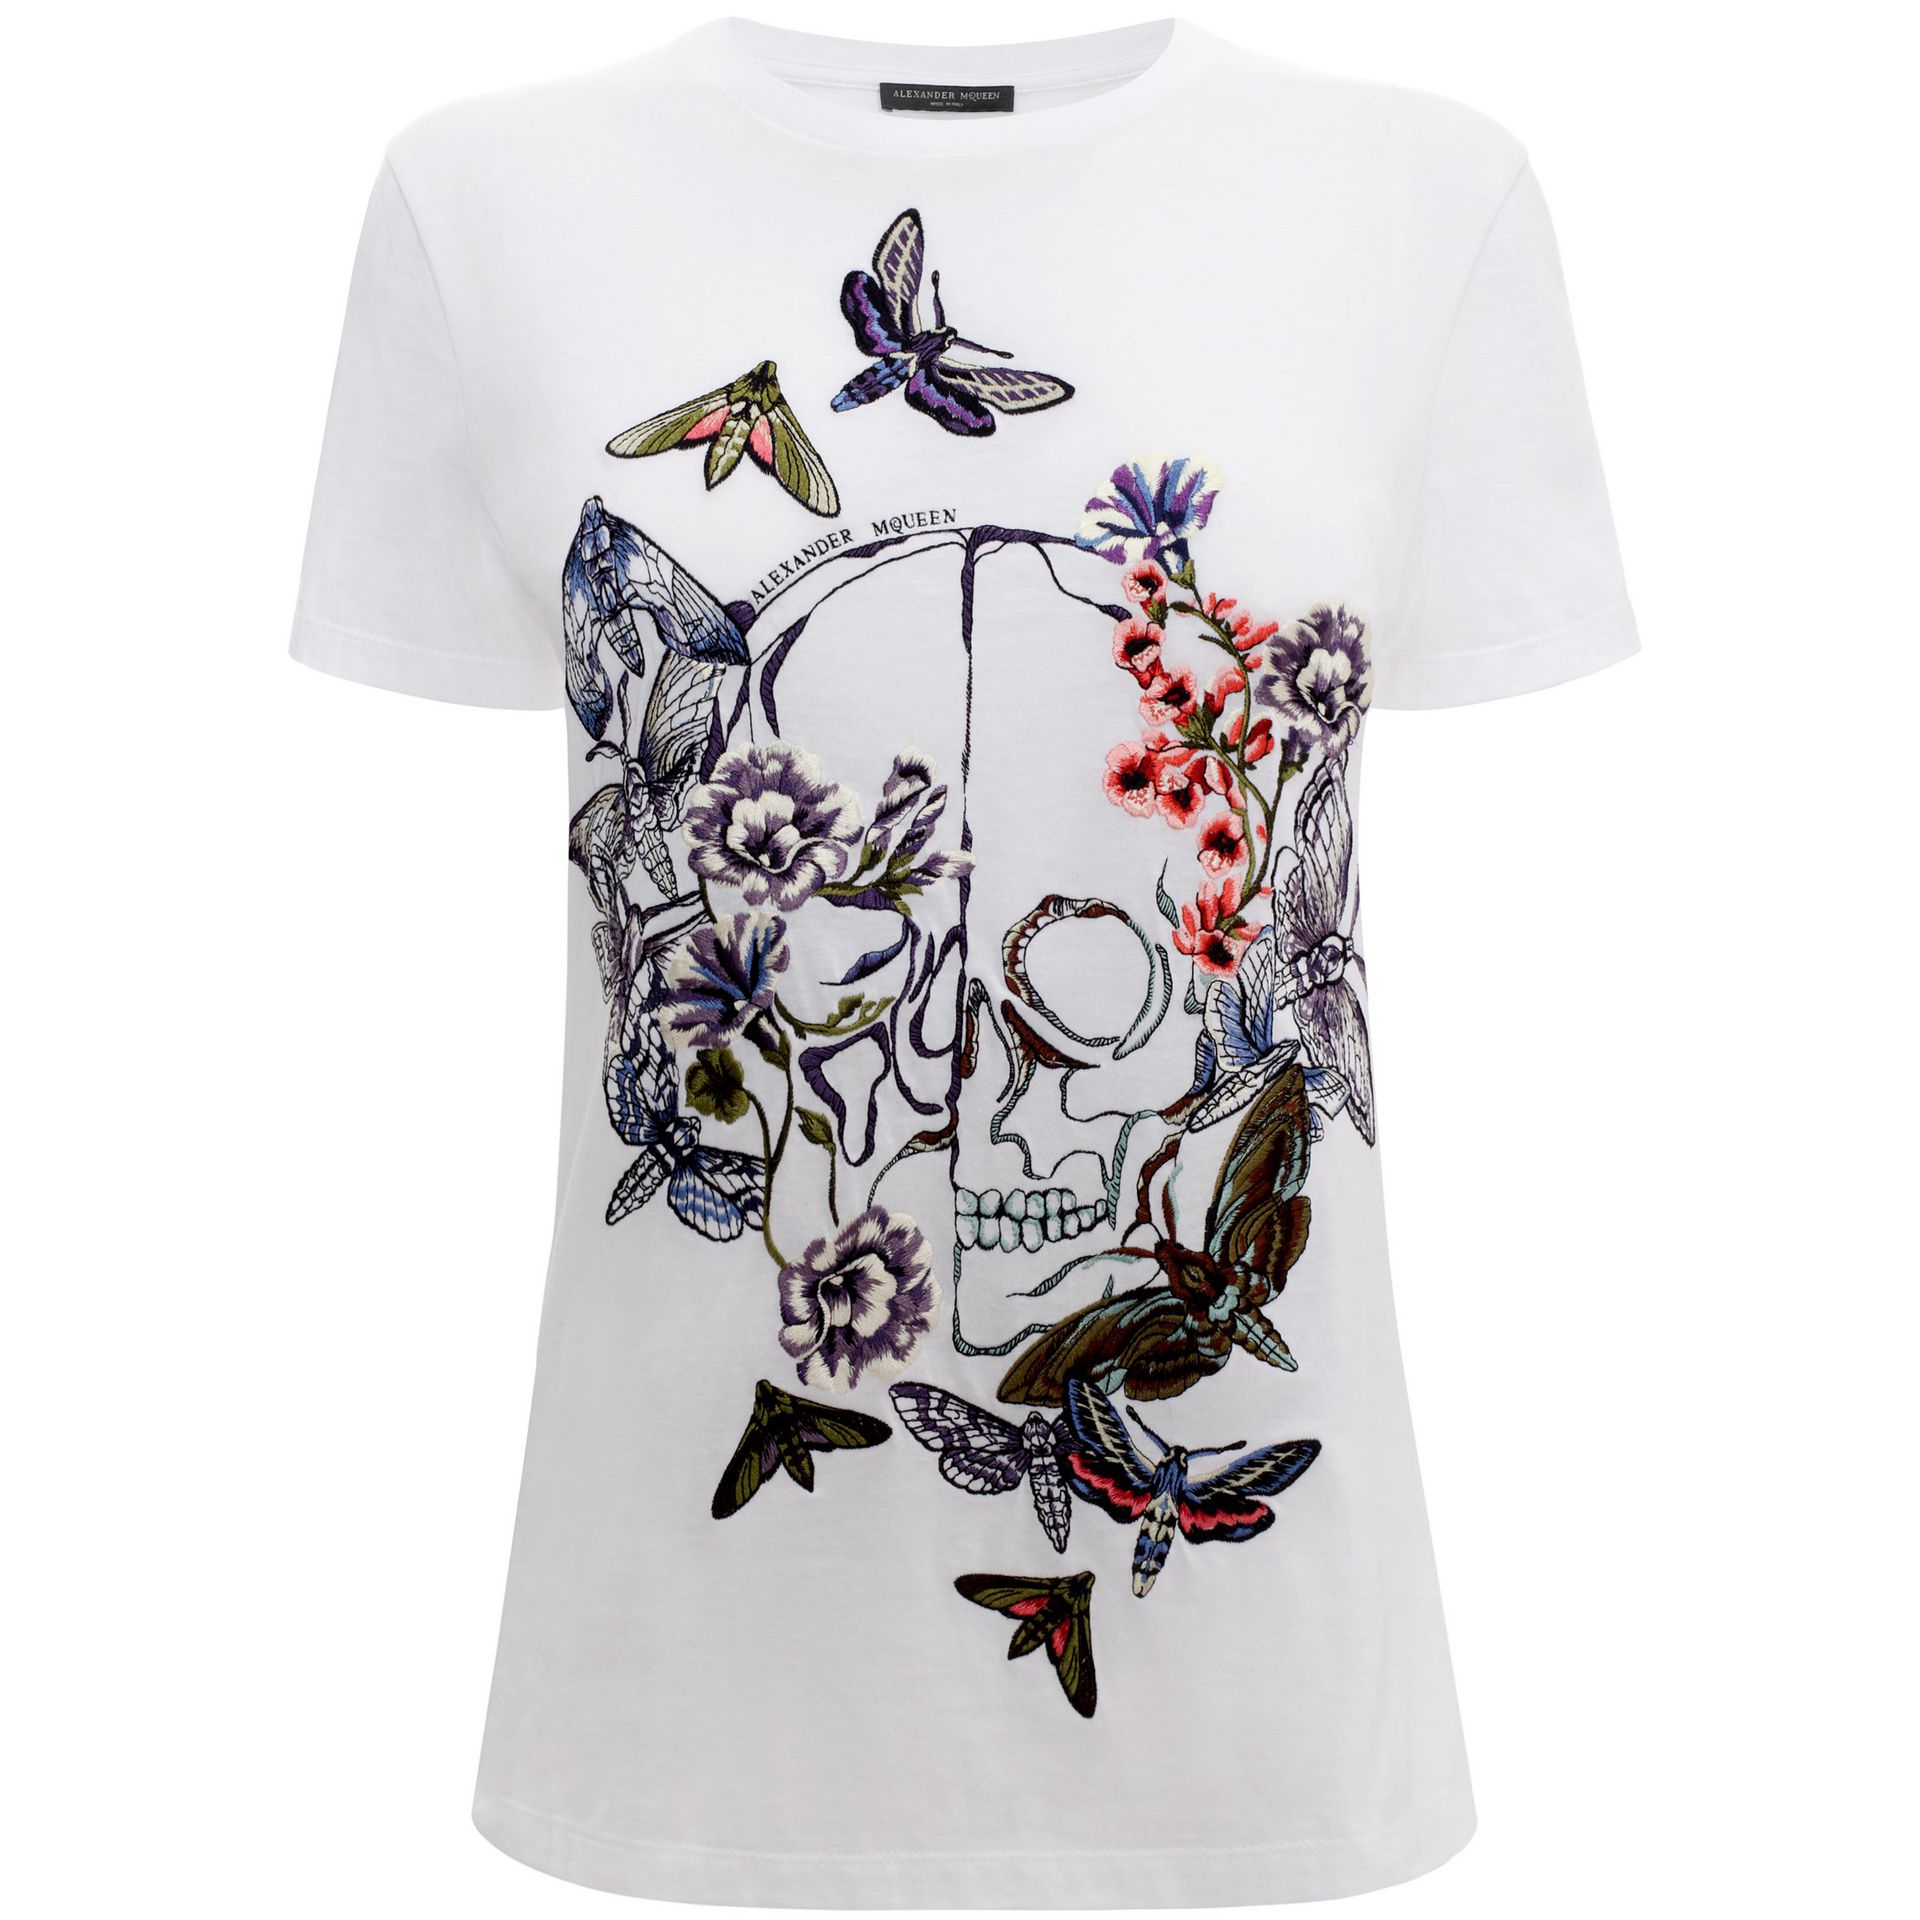 Lyst - Alexander Mcqueen Moth Embroidery Boxy T-Shirt in White